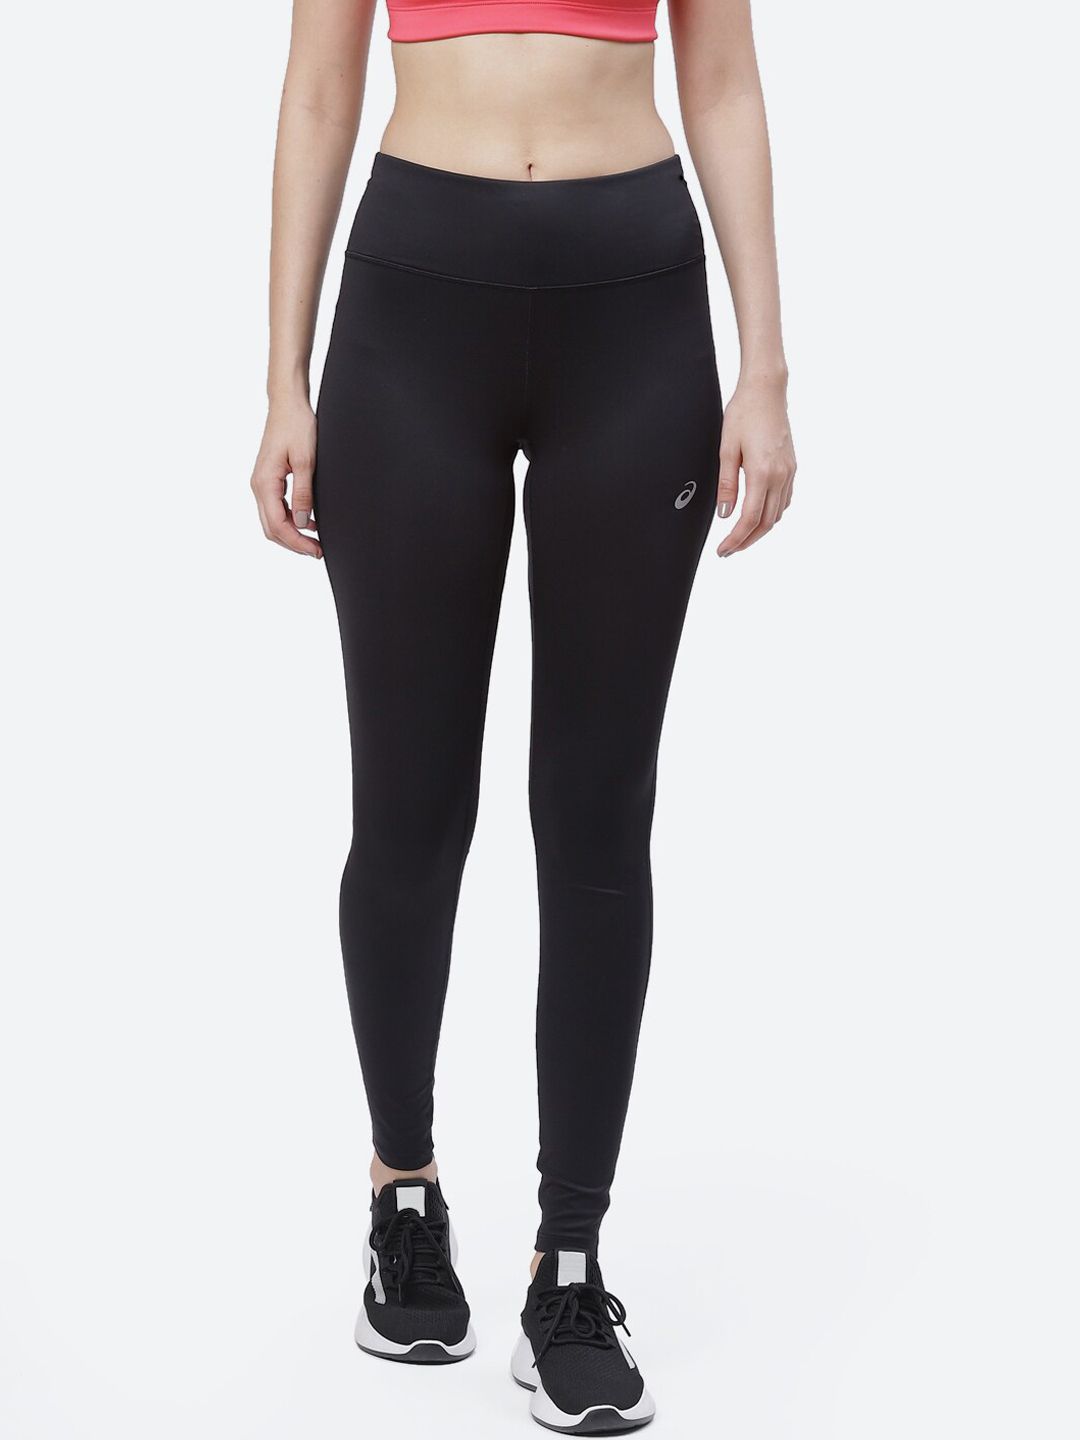 ASICS Women Black Solid SILVER Tights Price in India